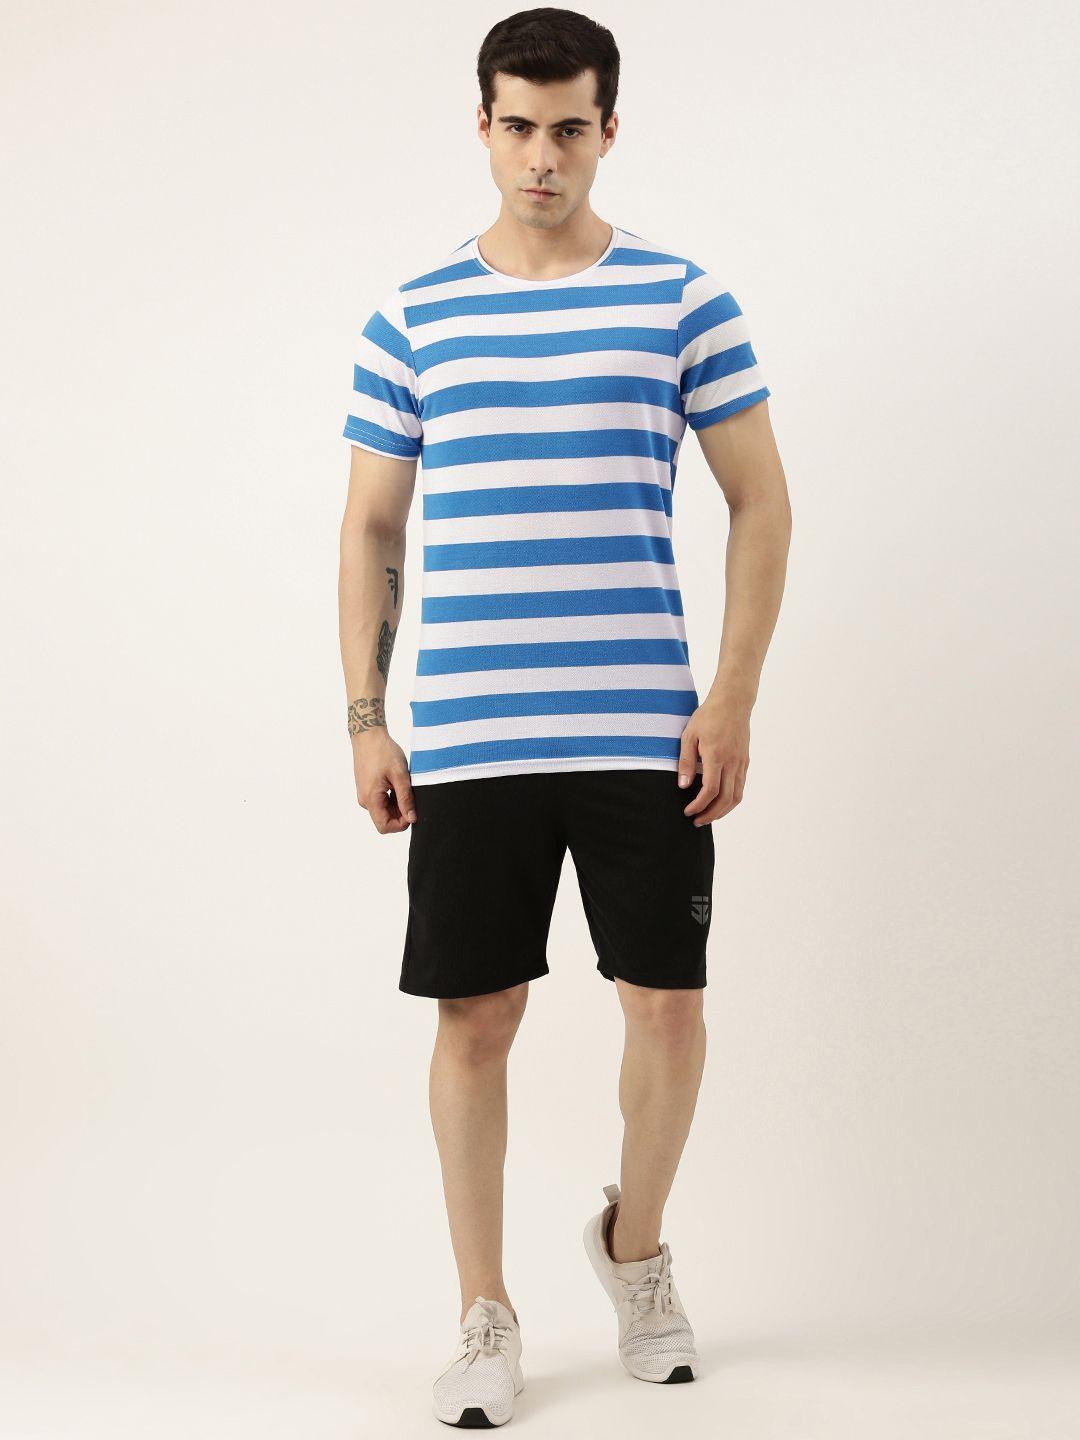 sports52 wear men striped t-shirt with shorts training tracksuit